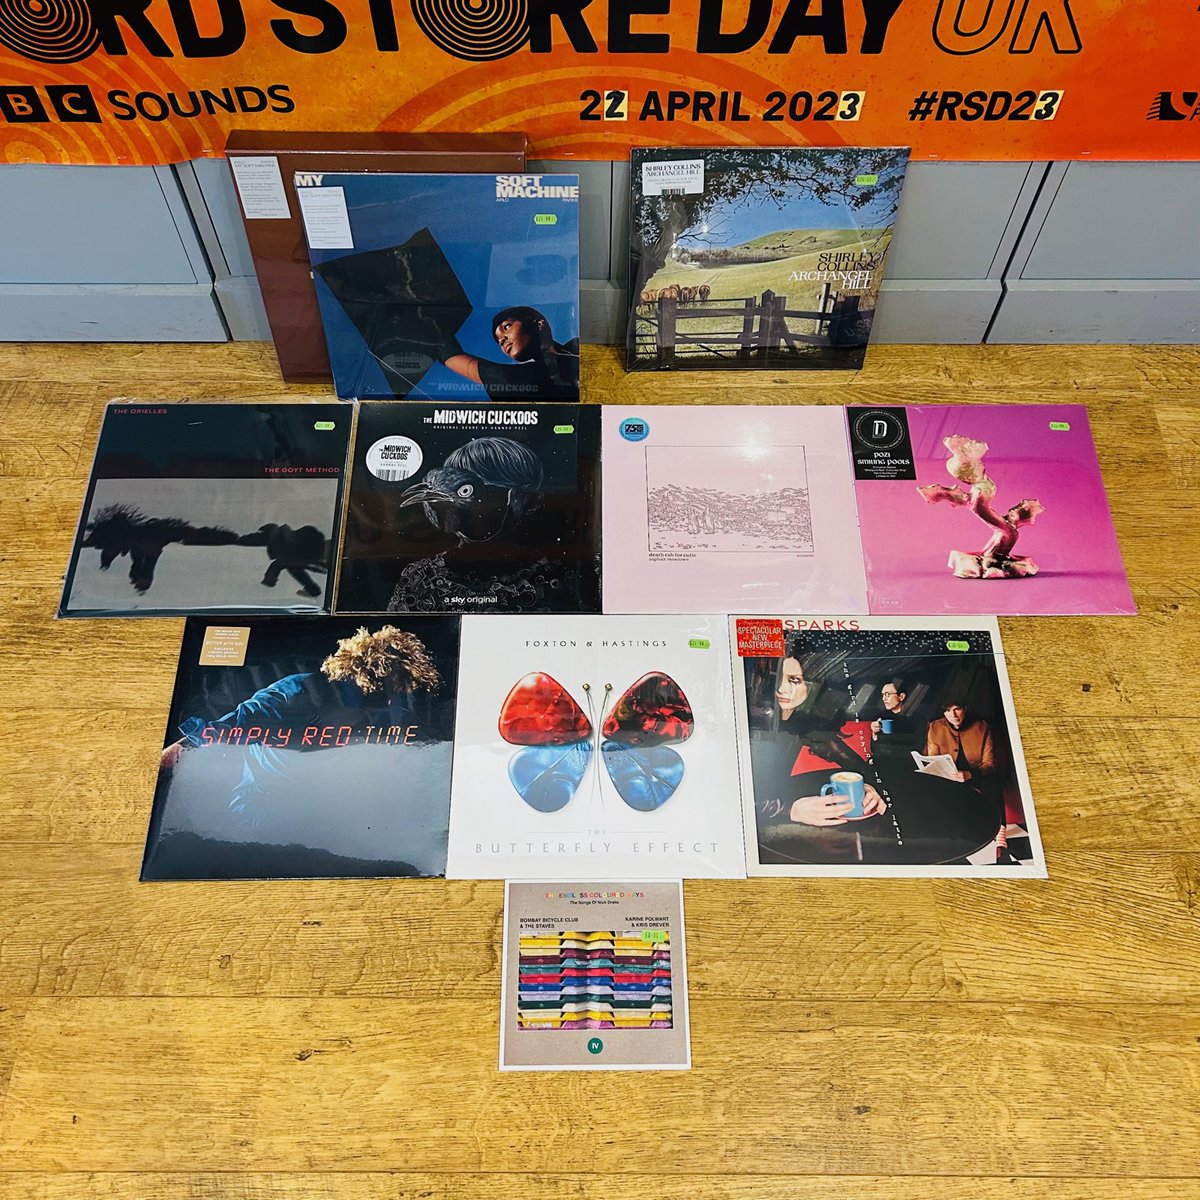 #NewMusicFriday New albums from Arlo Parks, @sparksofficial, @shirleyeCollins and @SimplyRedHQ plus last copy of the @poziband @dinkededition, @TheOrielles 12', @dcfc acoustic, @Hanpeel soundtrack, latest Nick Drake covers 7' and more #WaxUpdate